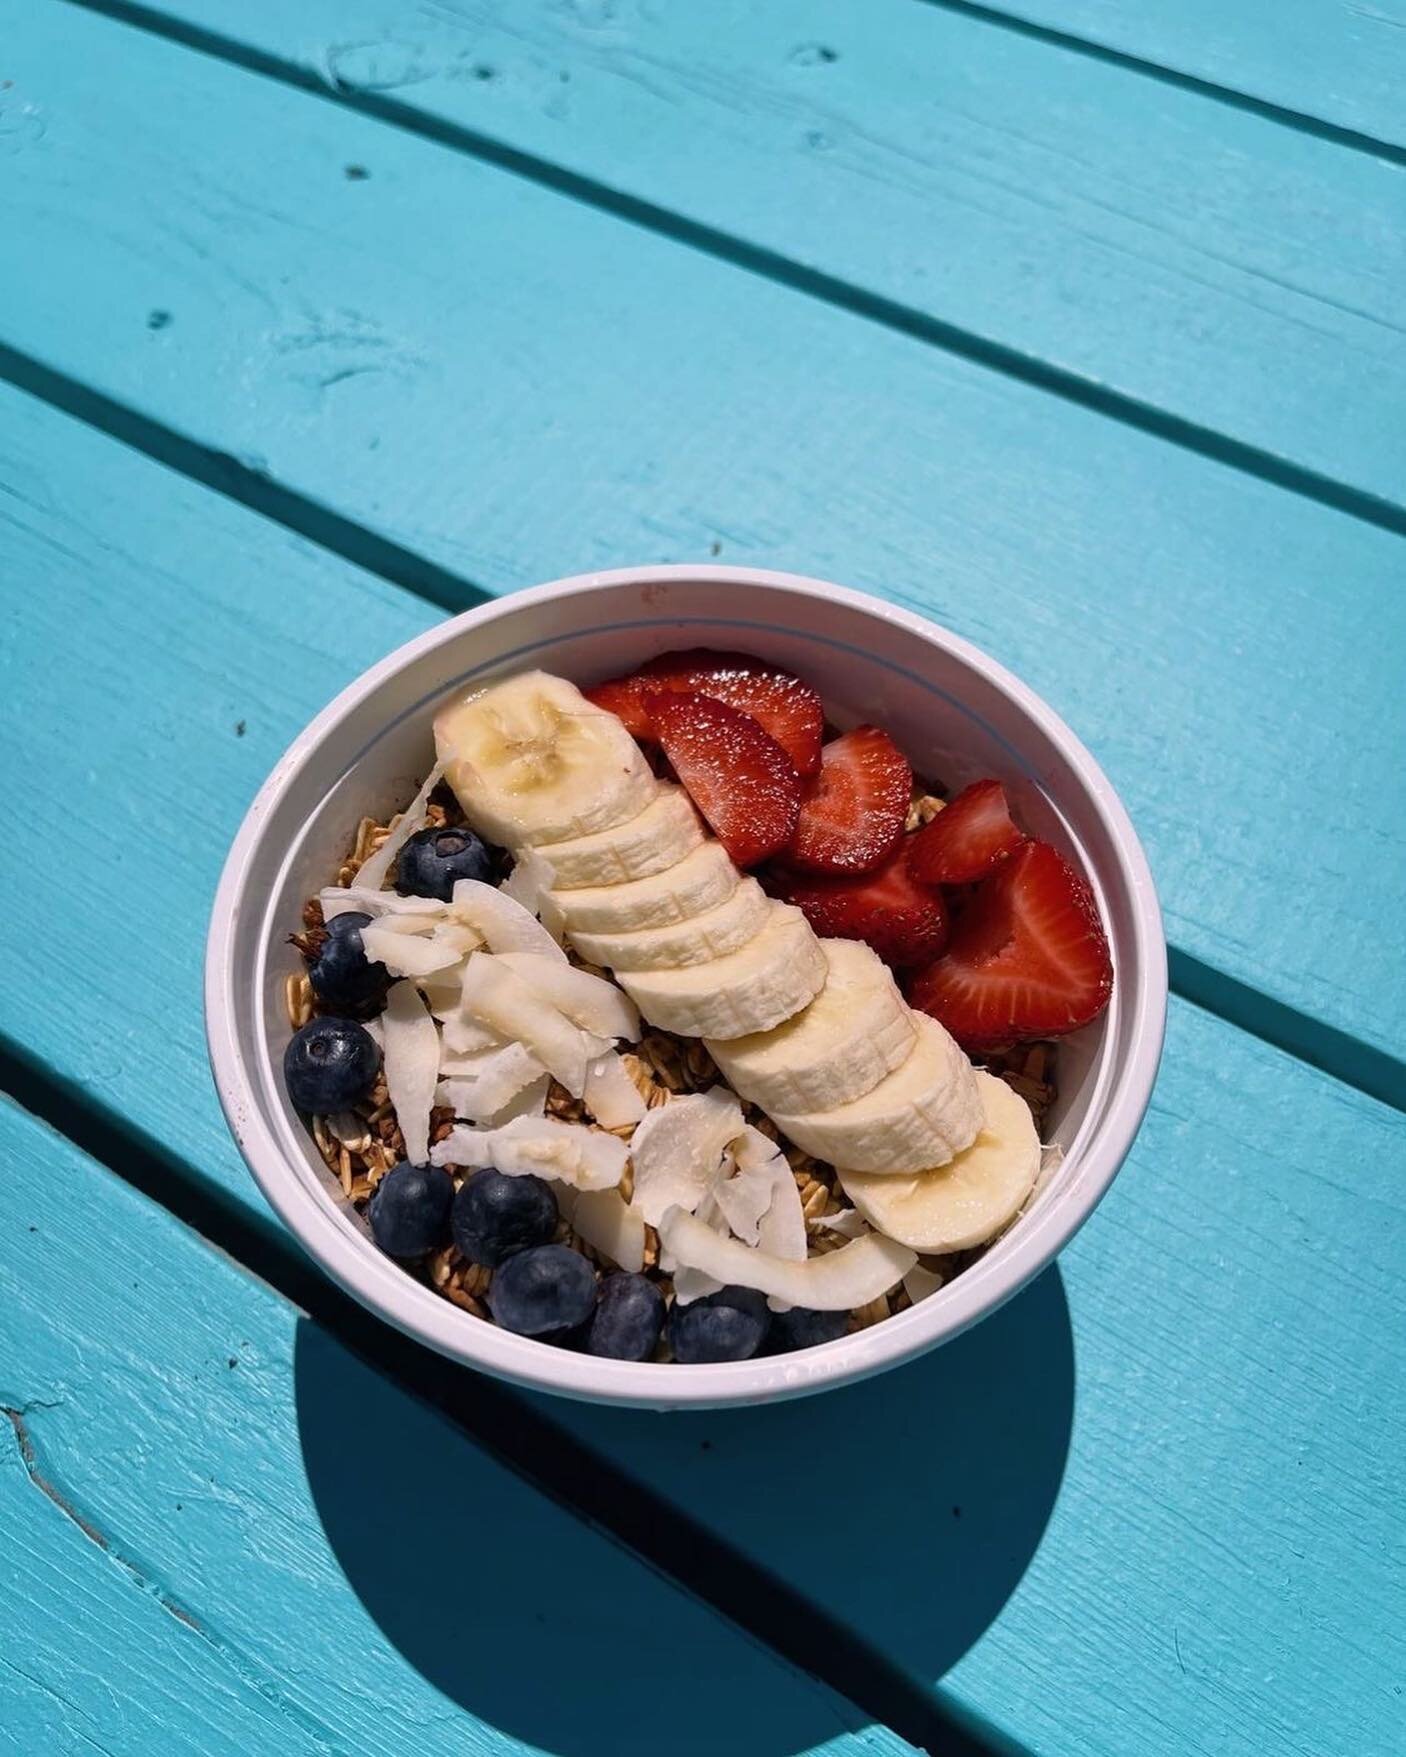 Warm days call for smoothie bowls 🫐 🍓 🍌 🥥 Grab one from Canmore or our Sicamous location💛

#haveablondemoment 
.
.
.
.
#smoothiebowl #smoothie #blondiescafe #coffeeshop #canmore #canmorealberta #sicamous #sicamousbc #foodie